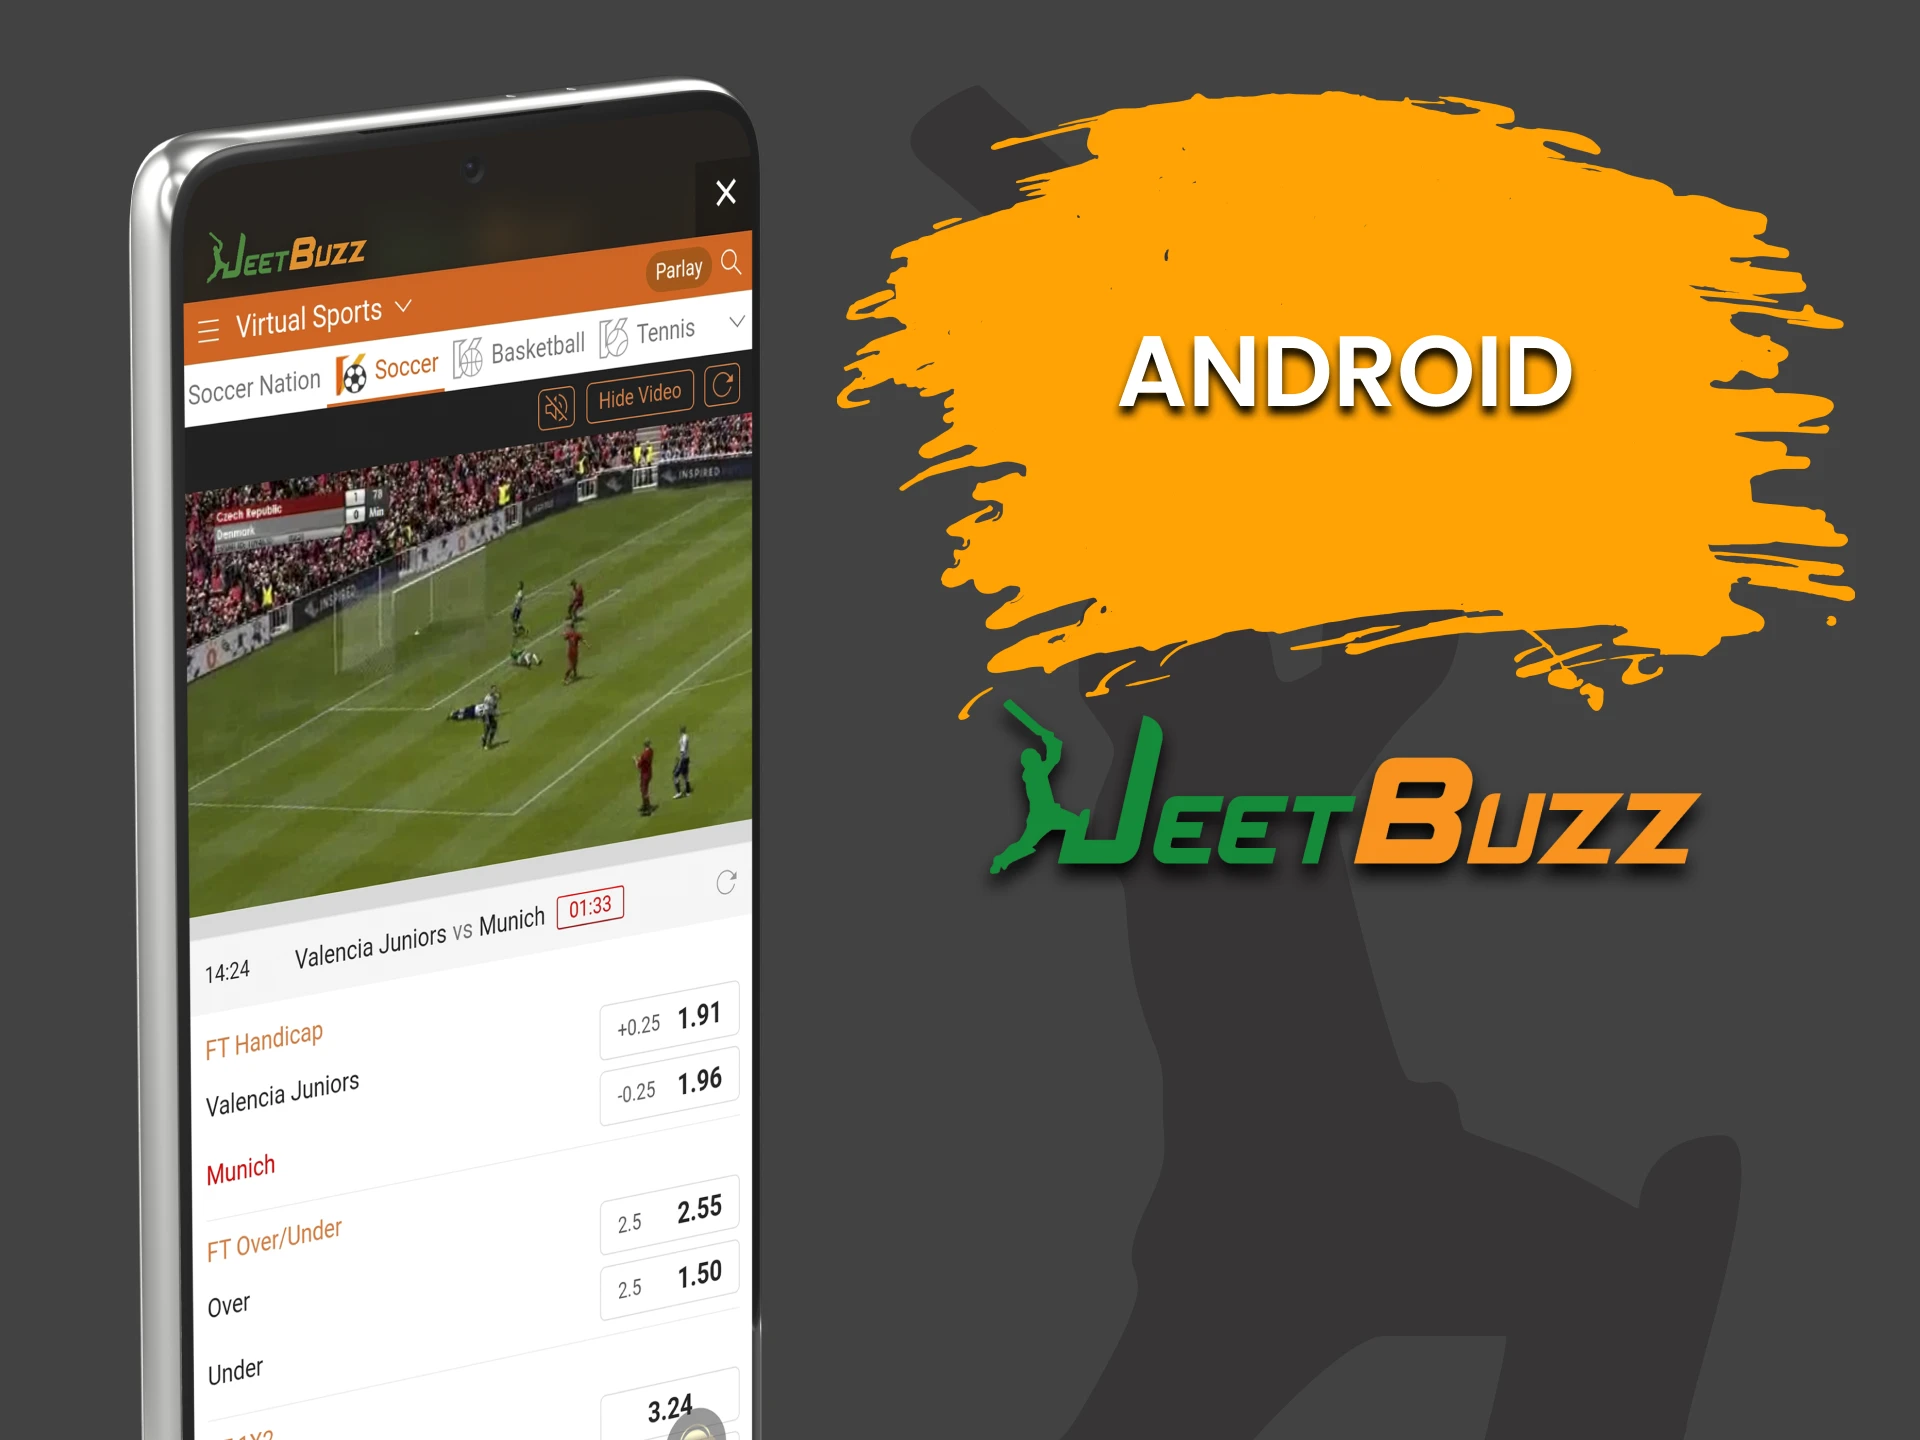 Bet on virtual sports with the JeetBuzz Android app.